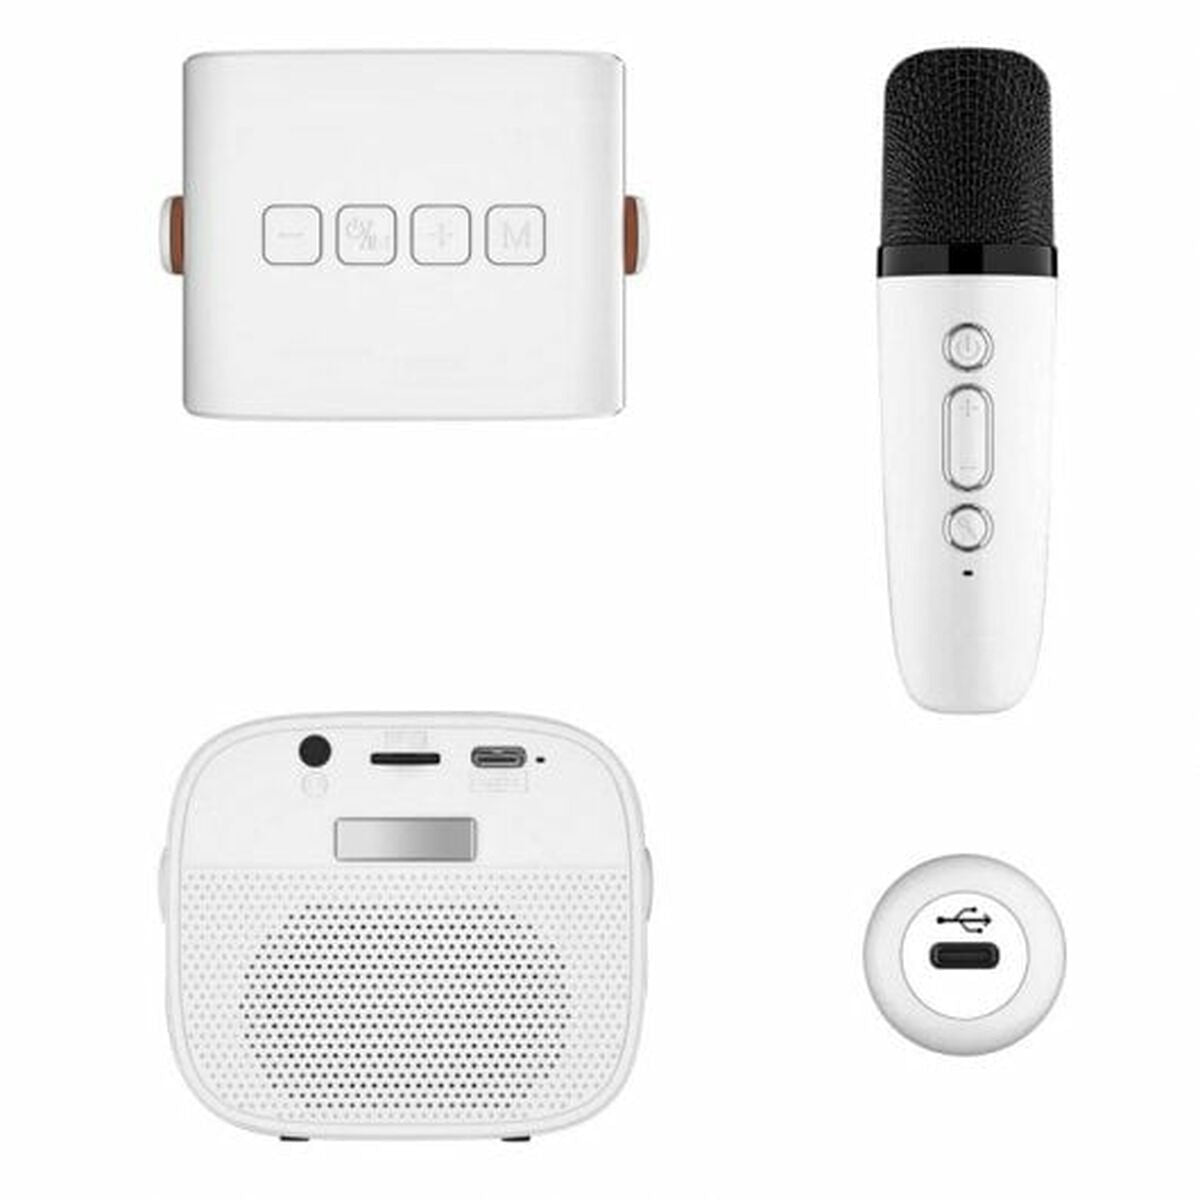 Portable Bluetooth Speakers PcCom Essential White, PcCom, Electronics, Mobile communication and accessories, portable-bluetooth-speakers-pccom-essential-white, Brand_PcCom, category-reference-2609, category-reference-2882, category-reference-2923, category-reference-t-19653, category-reference-t-21311, category-reference-t-25527, category-reference-t-4036, category-reference-t-4037, Condition_NEW, entertainment, music, Price_20 - 50, telephones & tablets, wifi y bluetooth, RiotNook